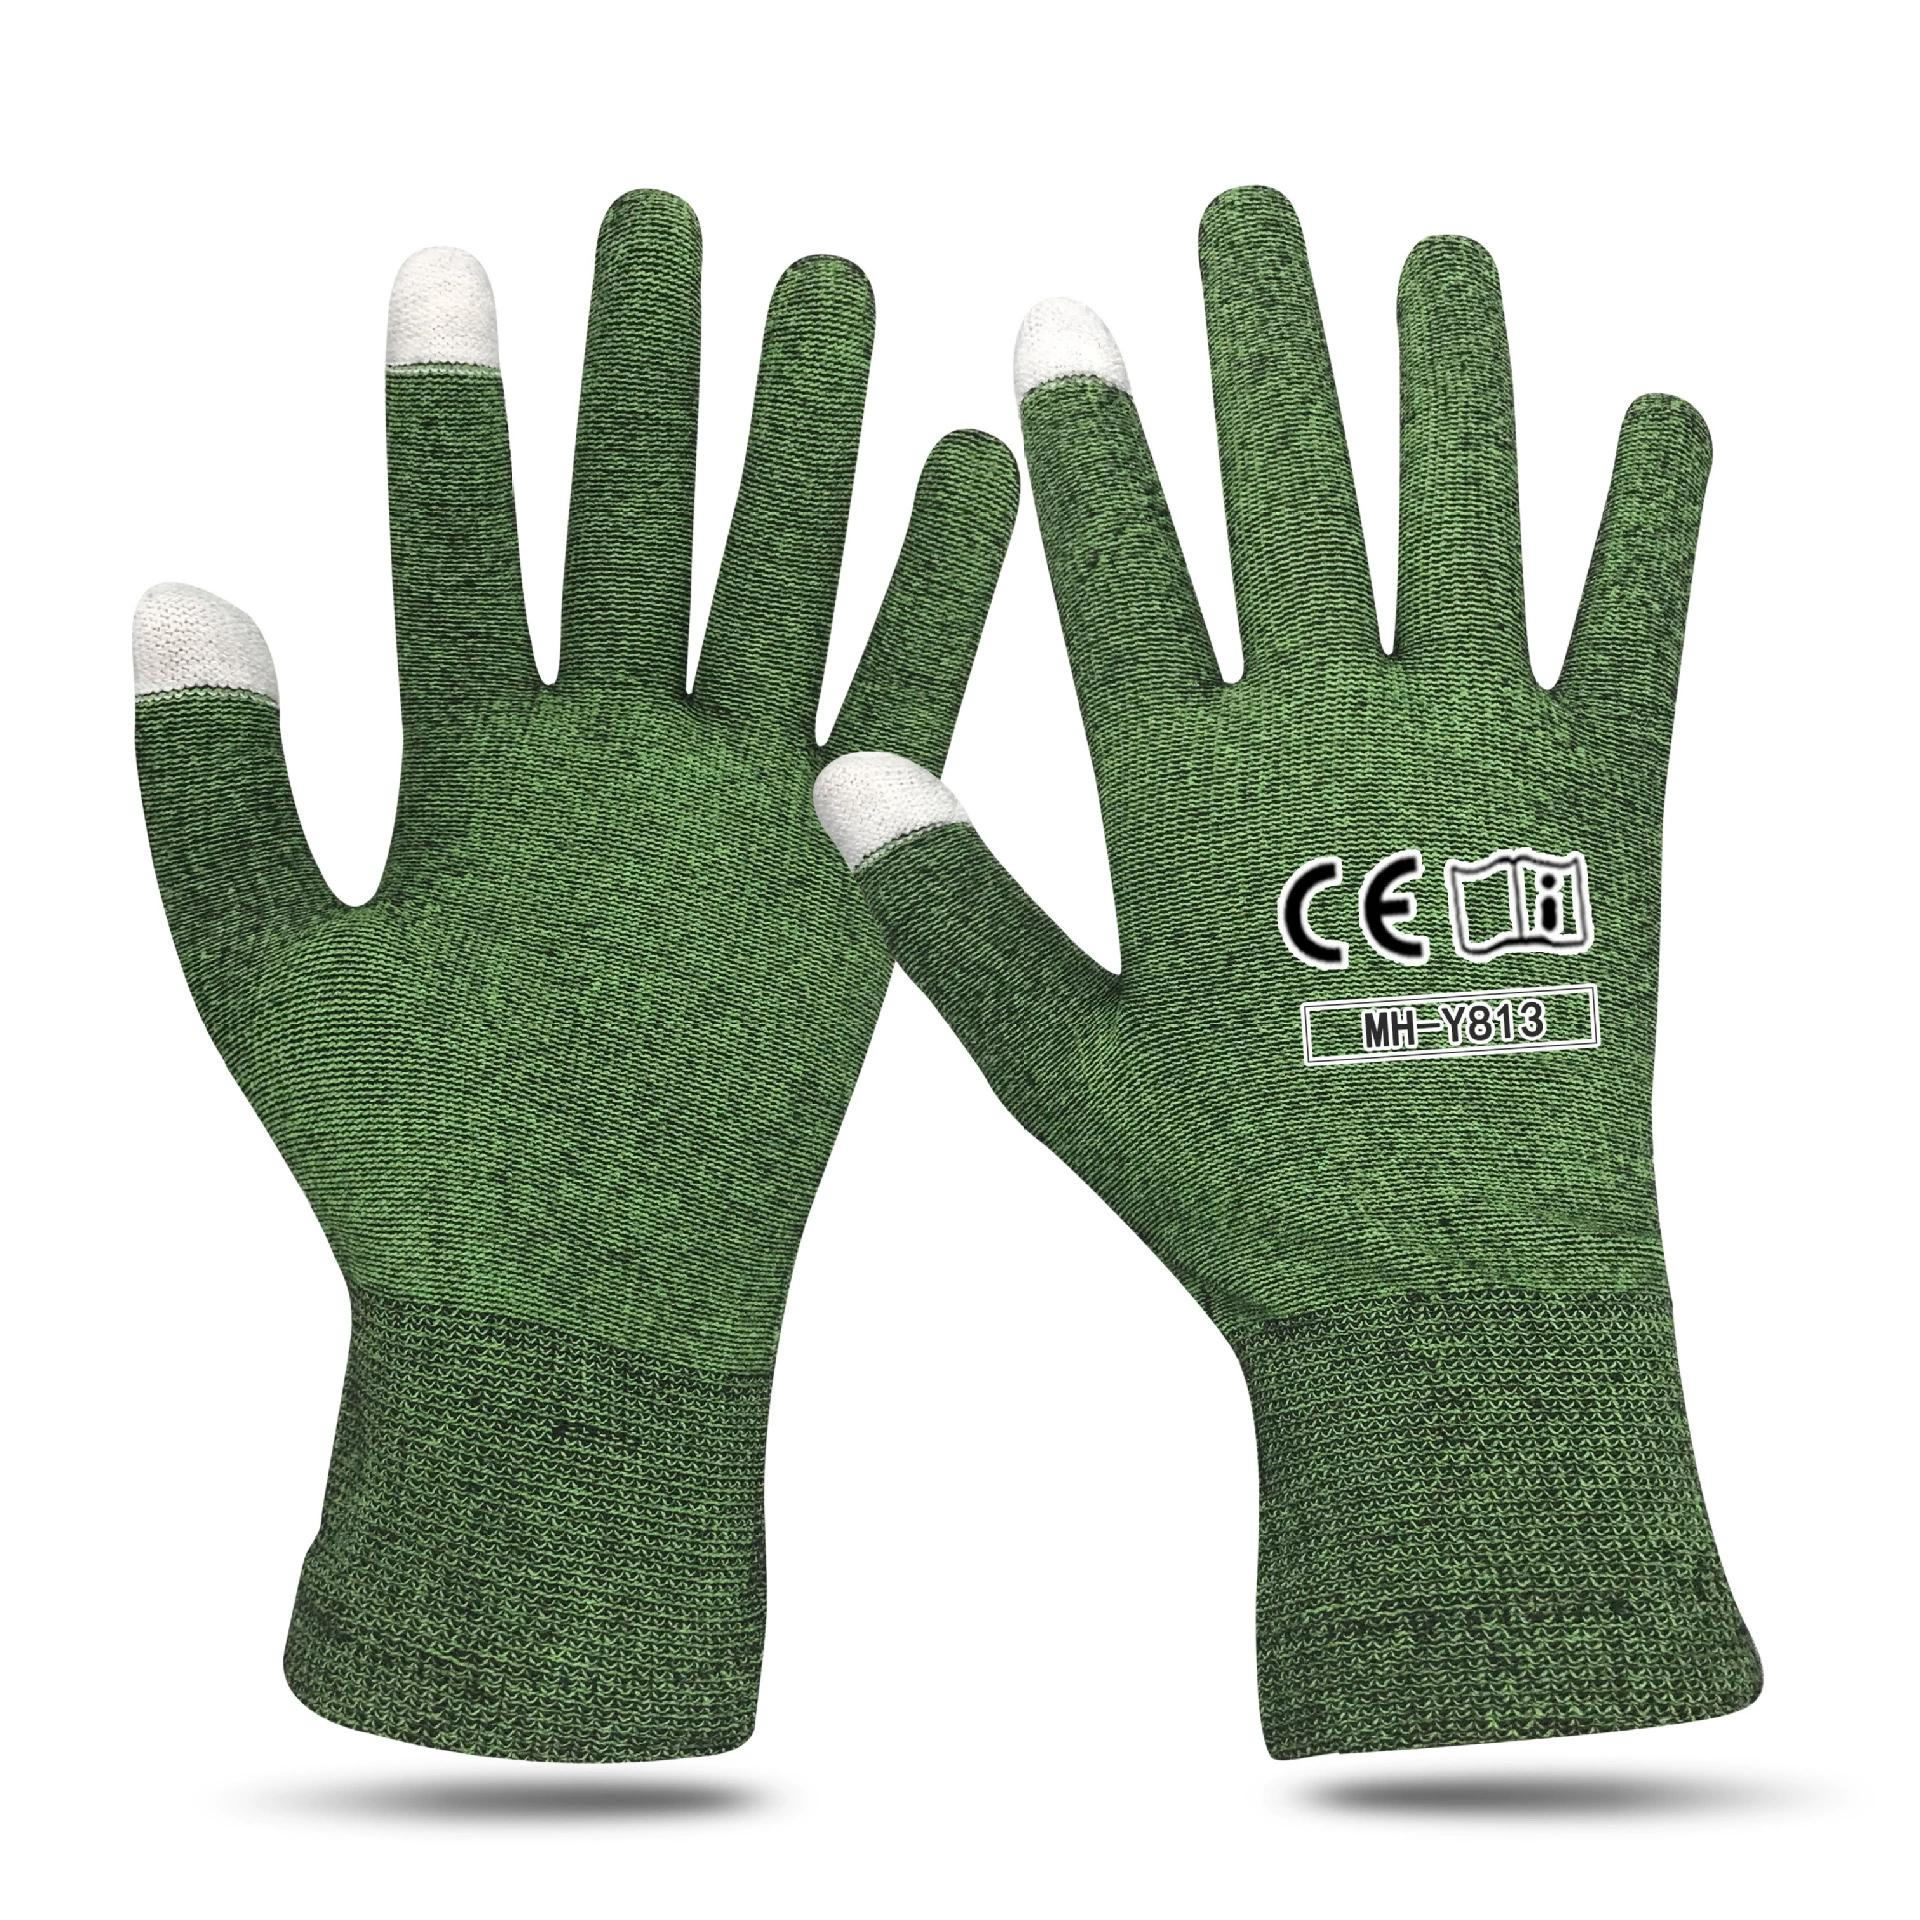 Warm game gloves (green two finger touch screen)